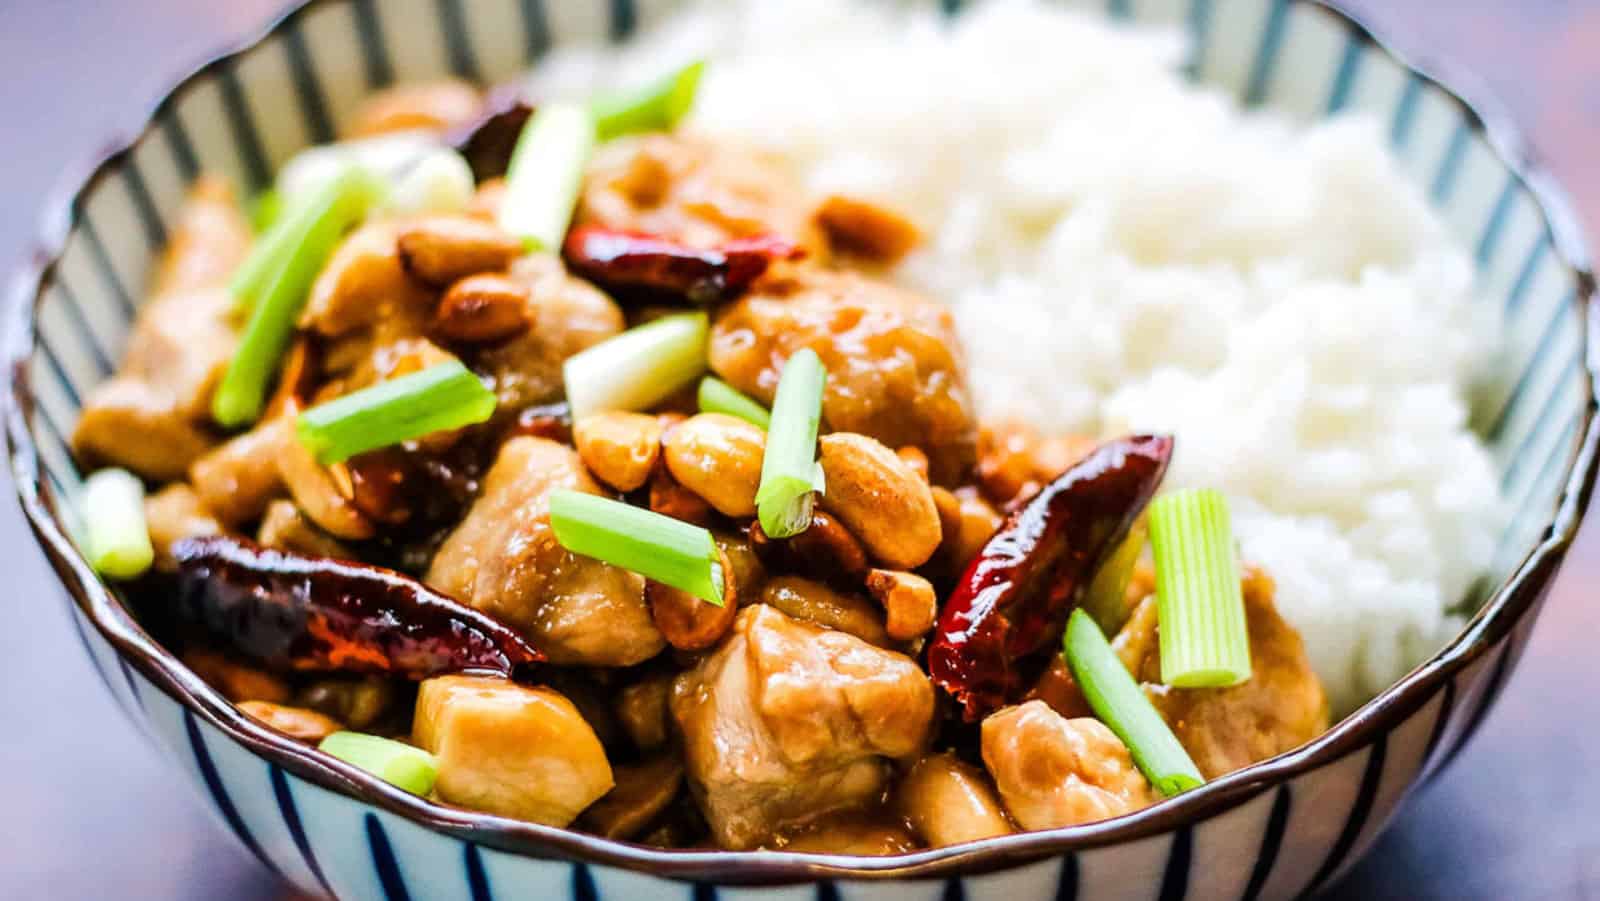 Kung pao chicken in a striped bowl with rice.